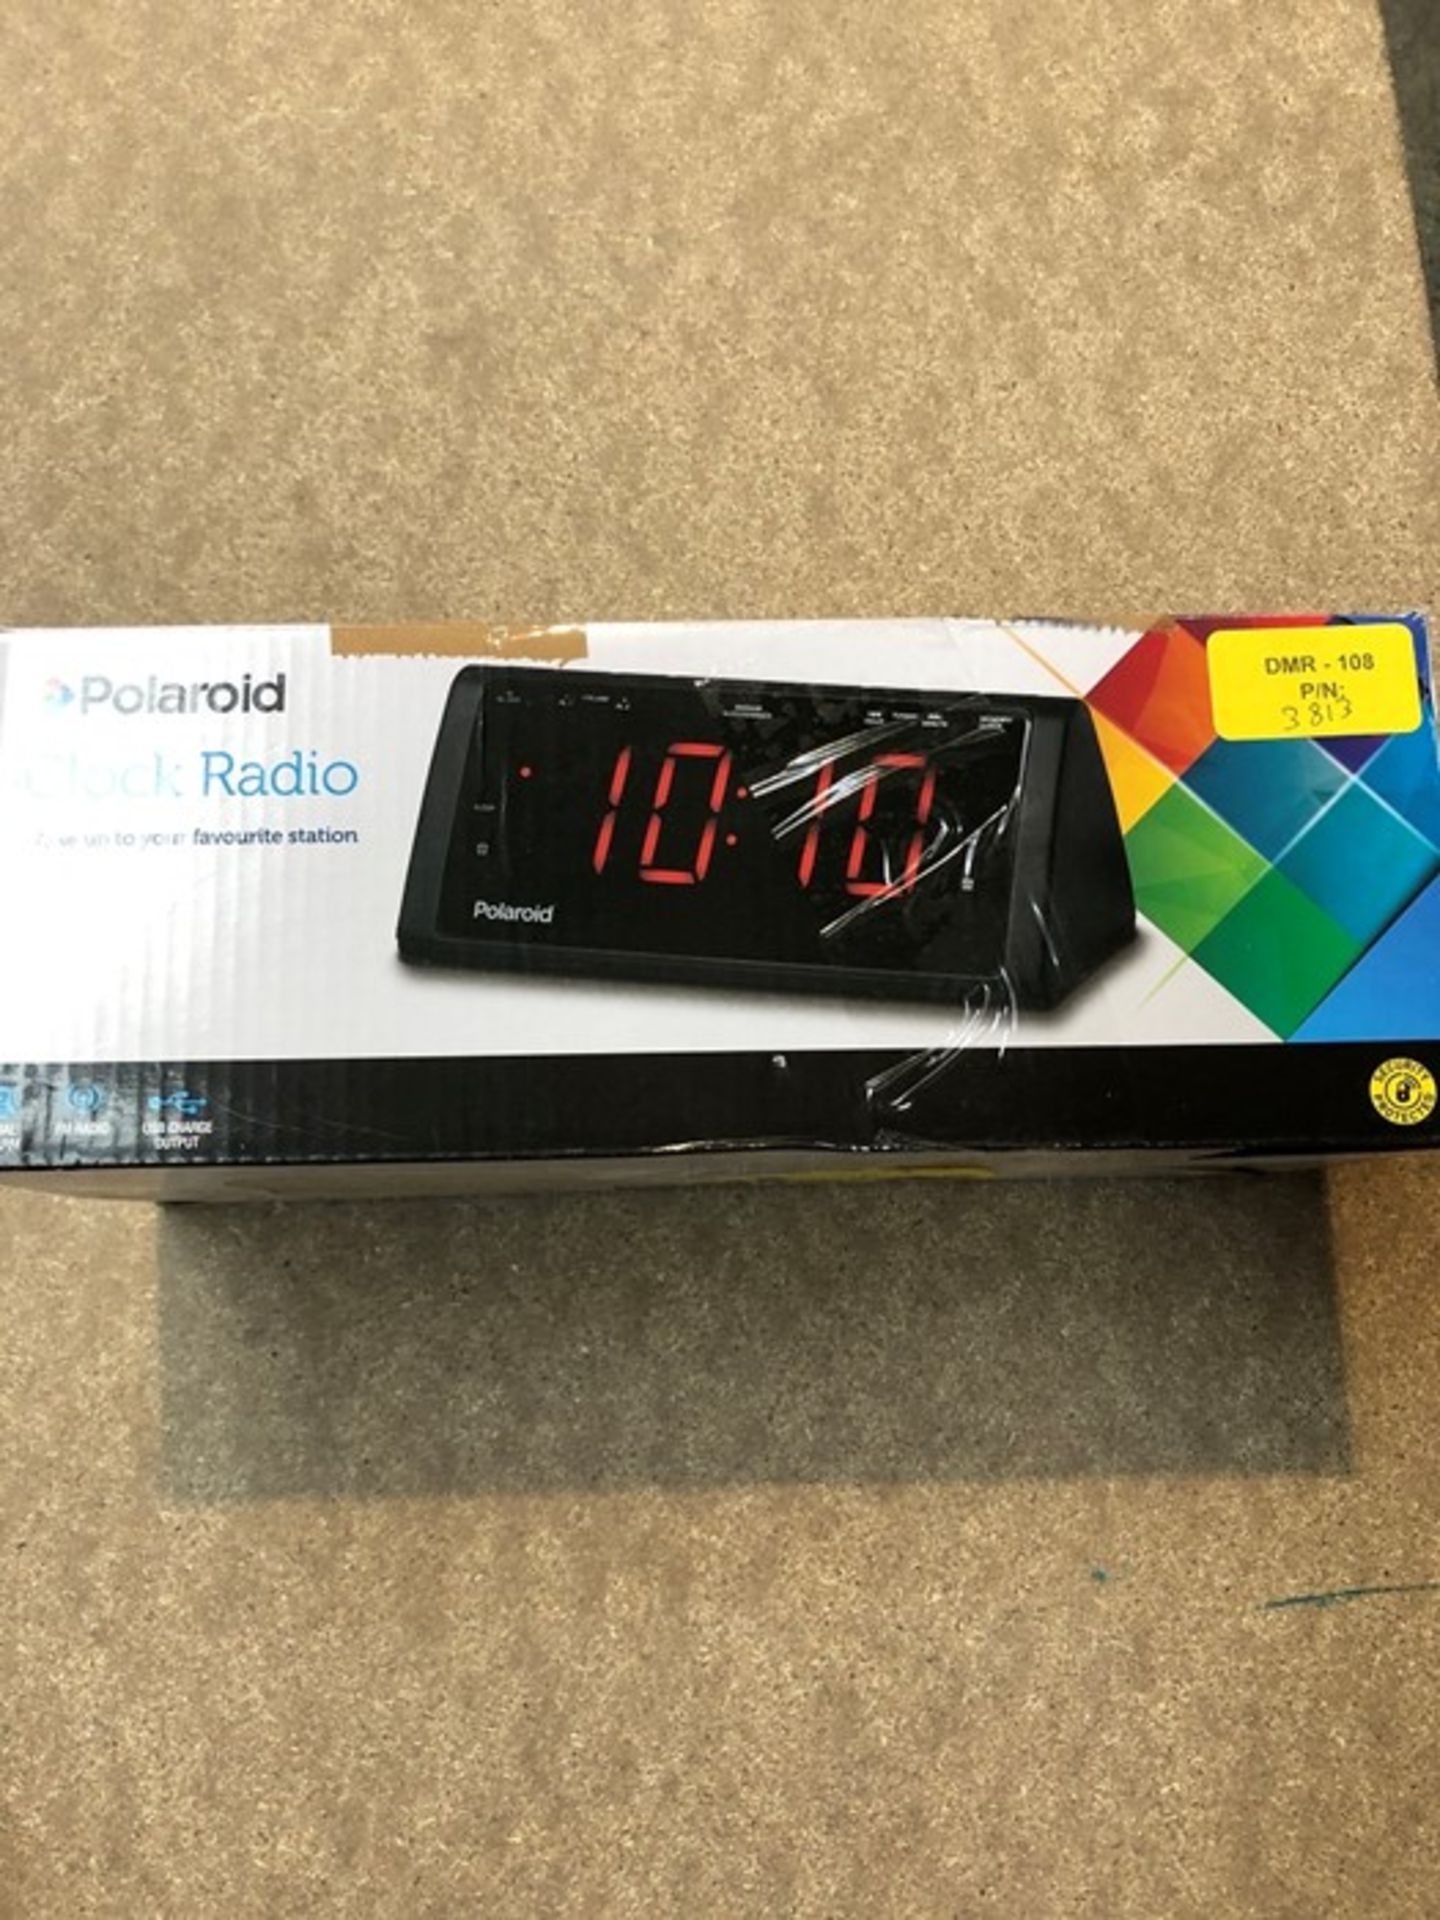 1 BOXED POLAROID CLOCK RADIO IN BLACK / RRP £15.00 - BL -3813 (VIEWING HIGHLY RECOMMENDED)